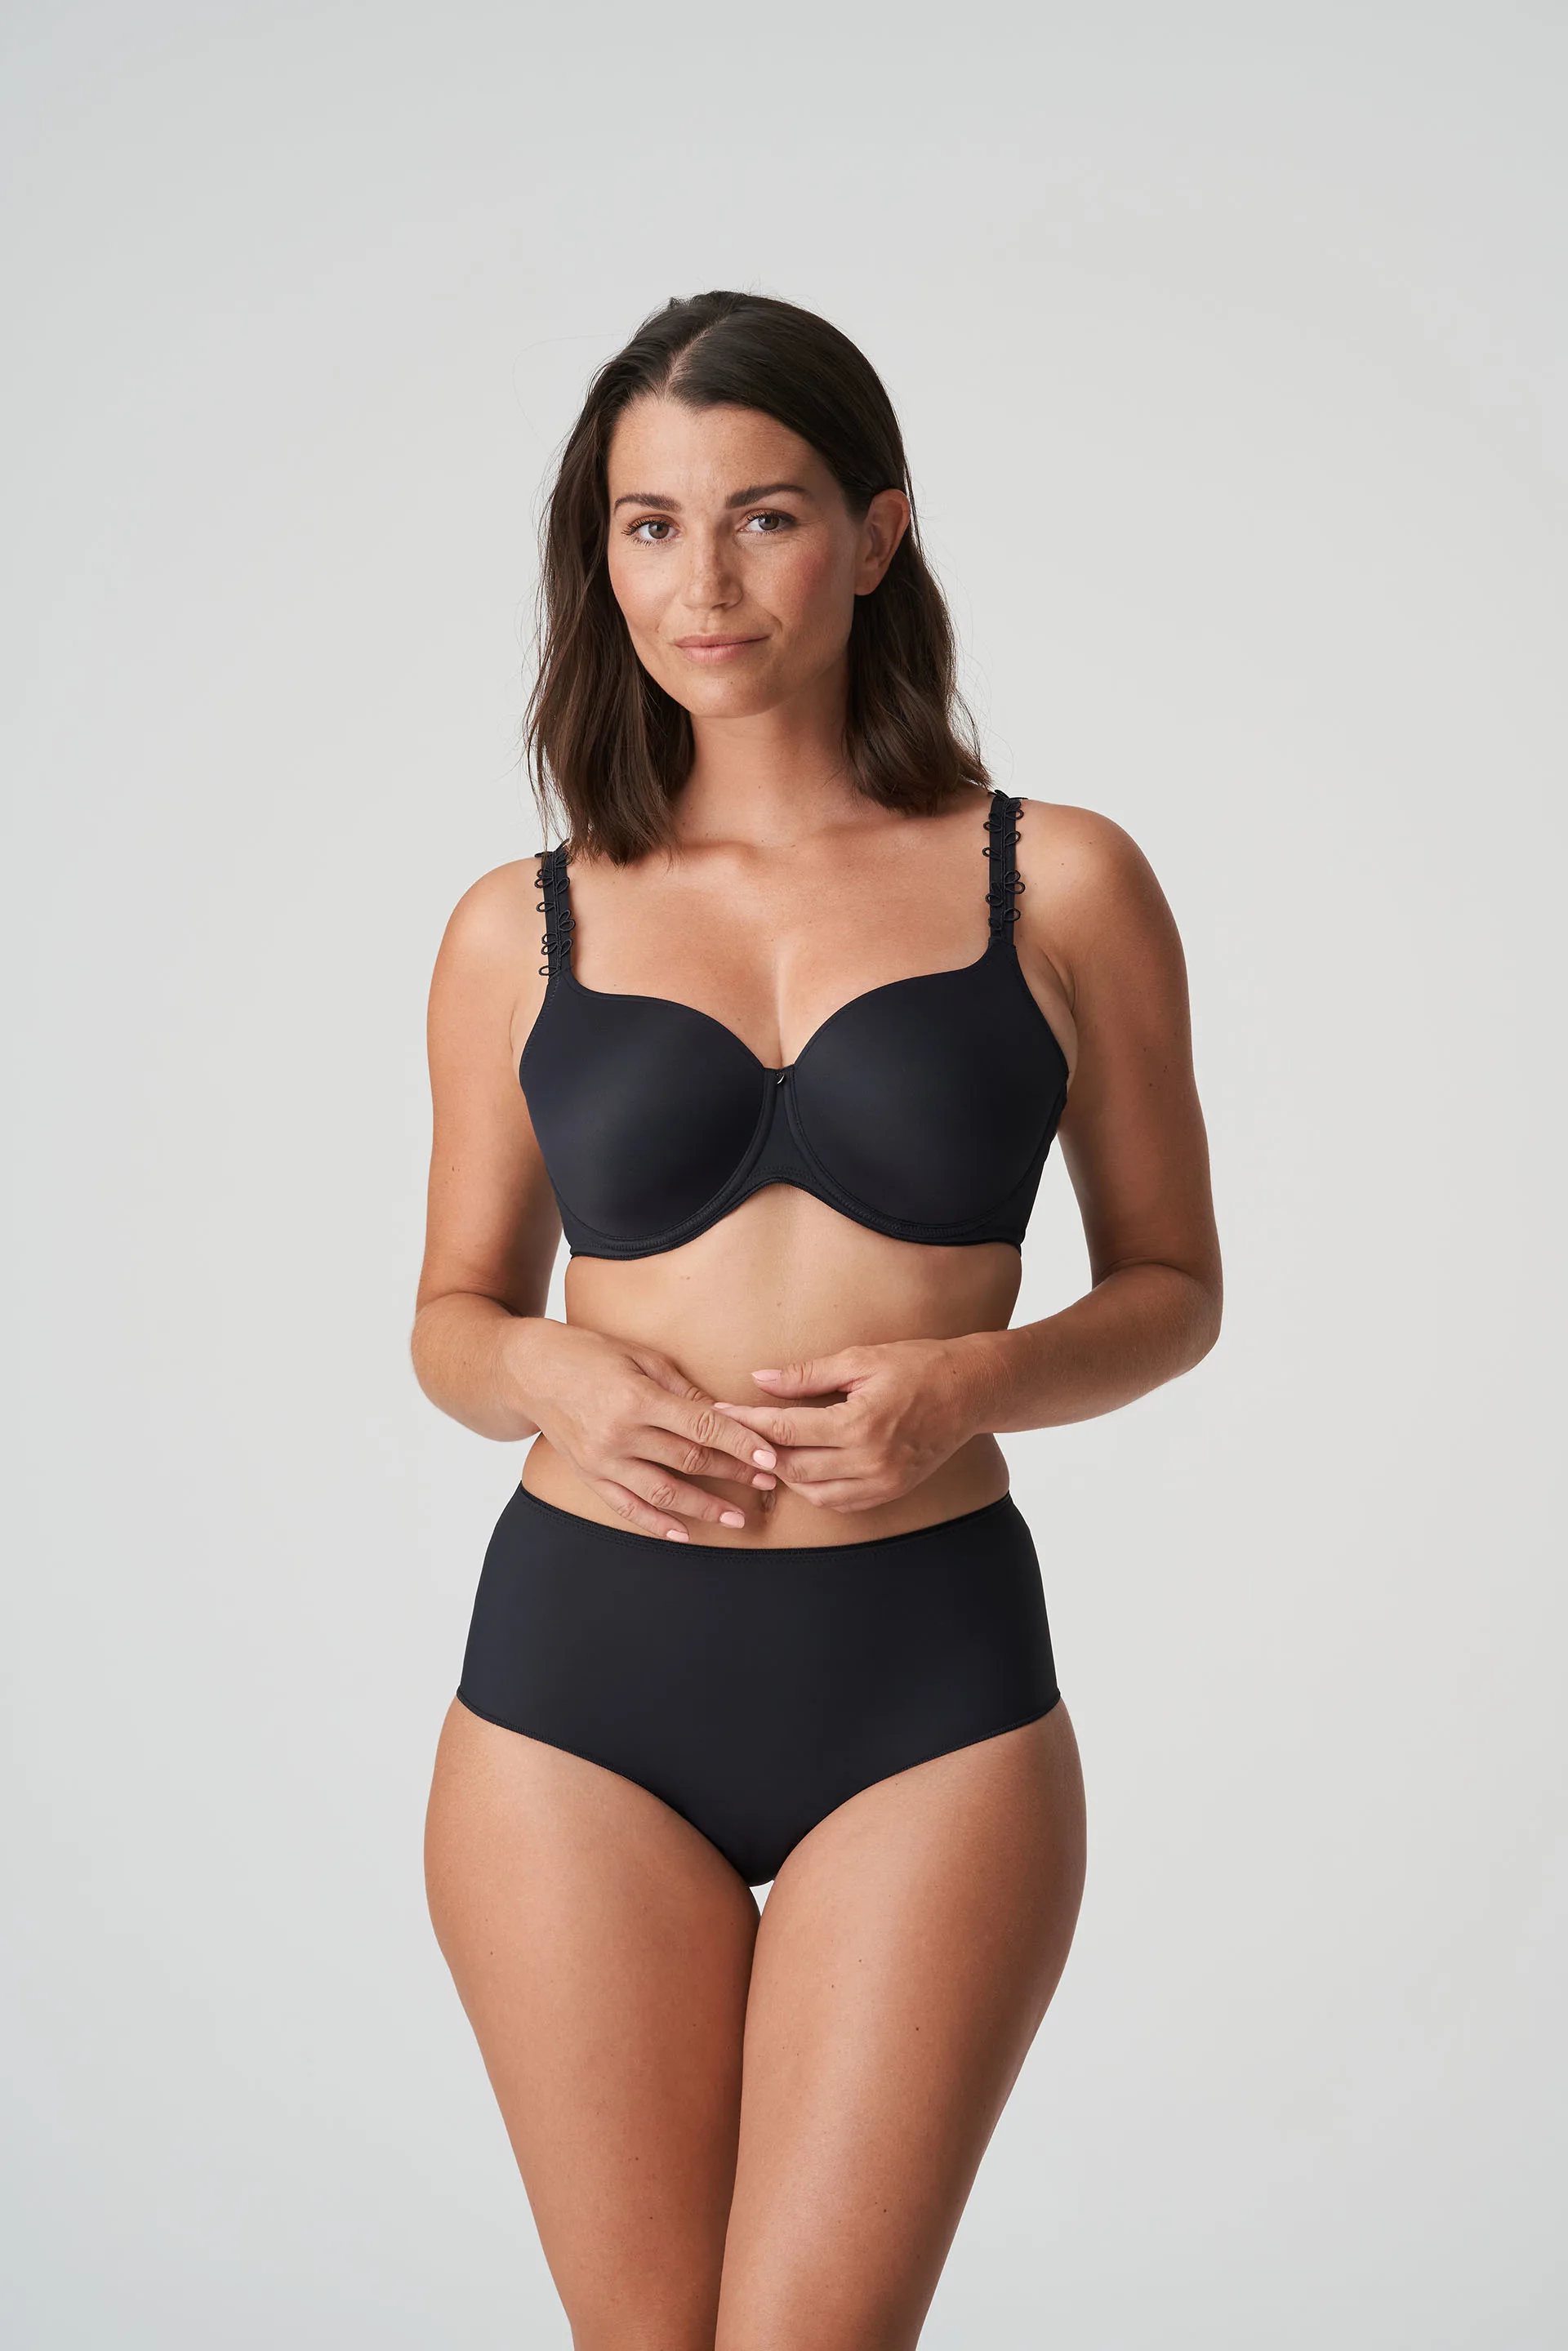 PrimaDonna PERLE charcoal padded bra - full cup